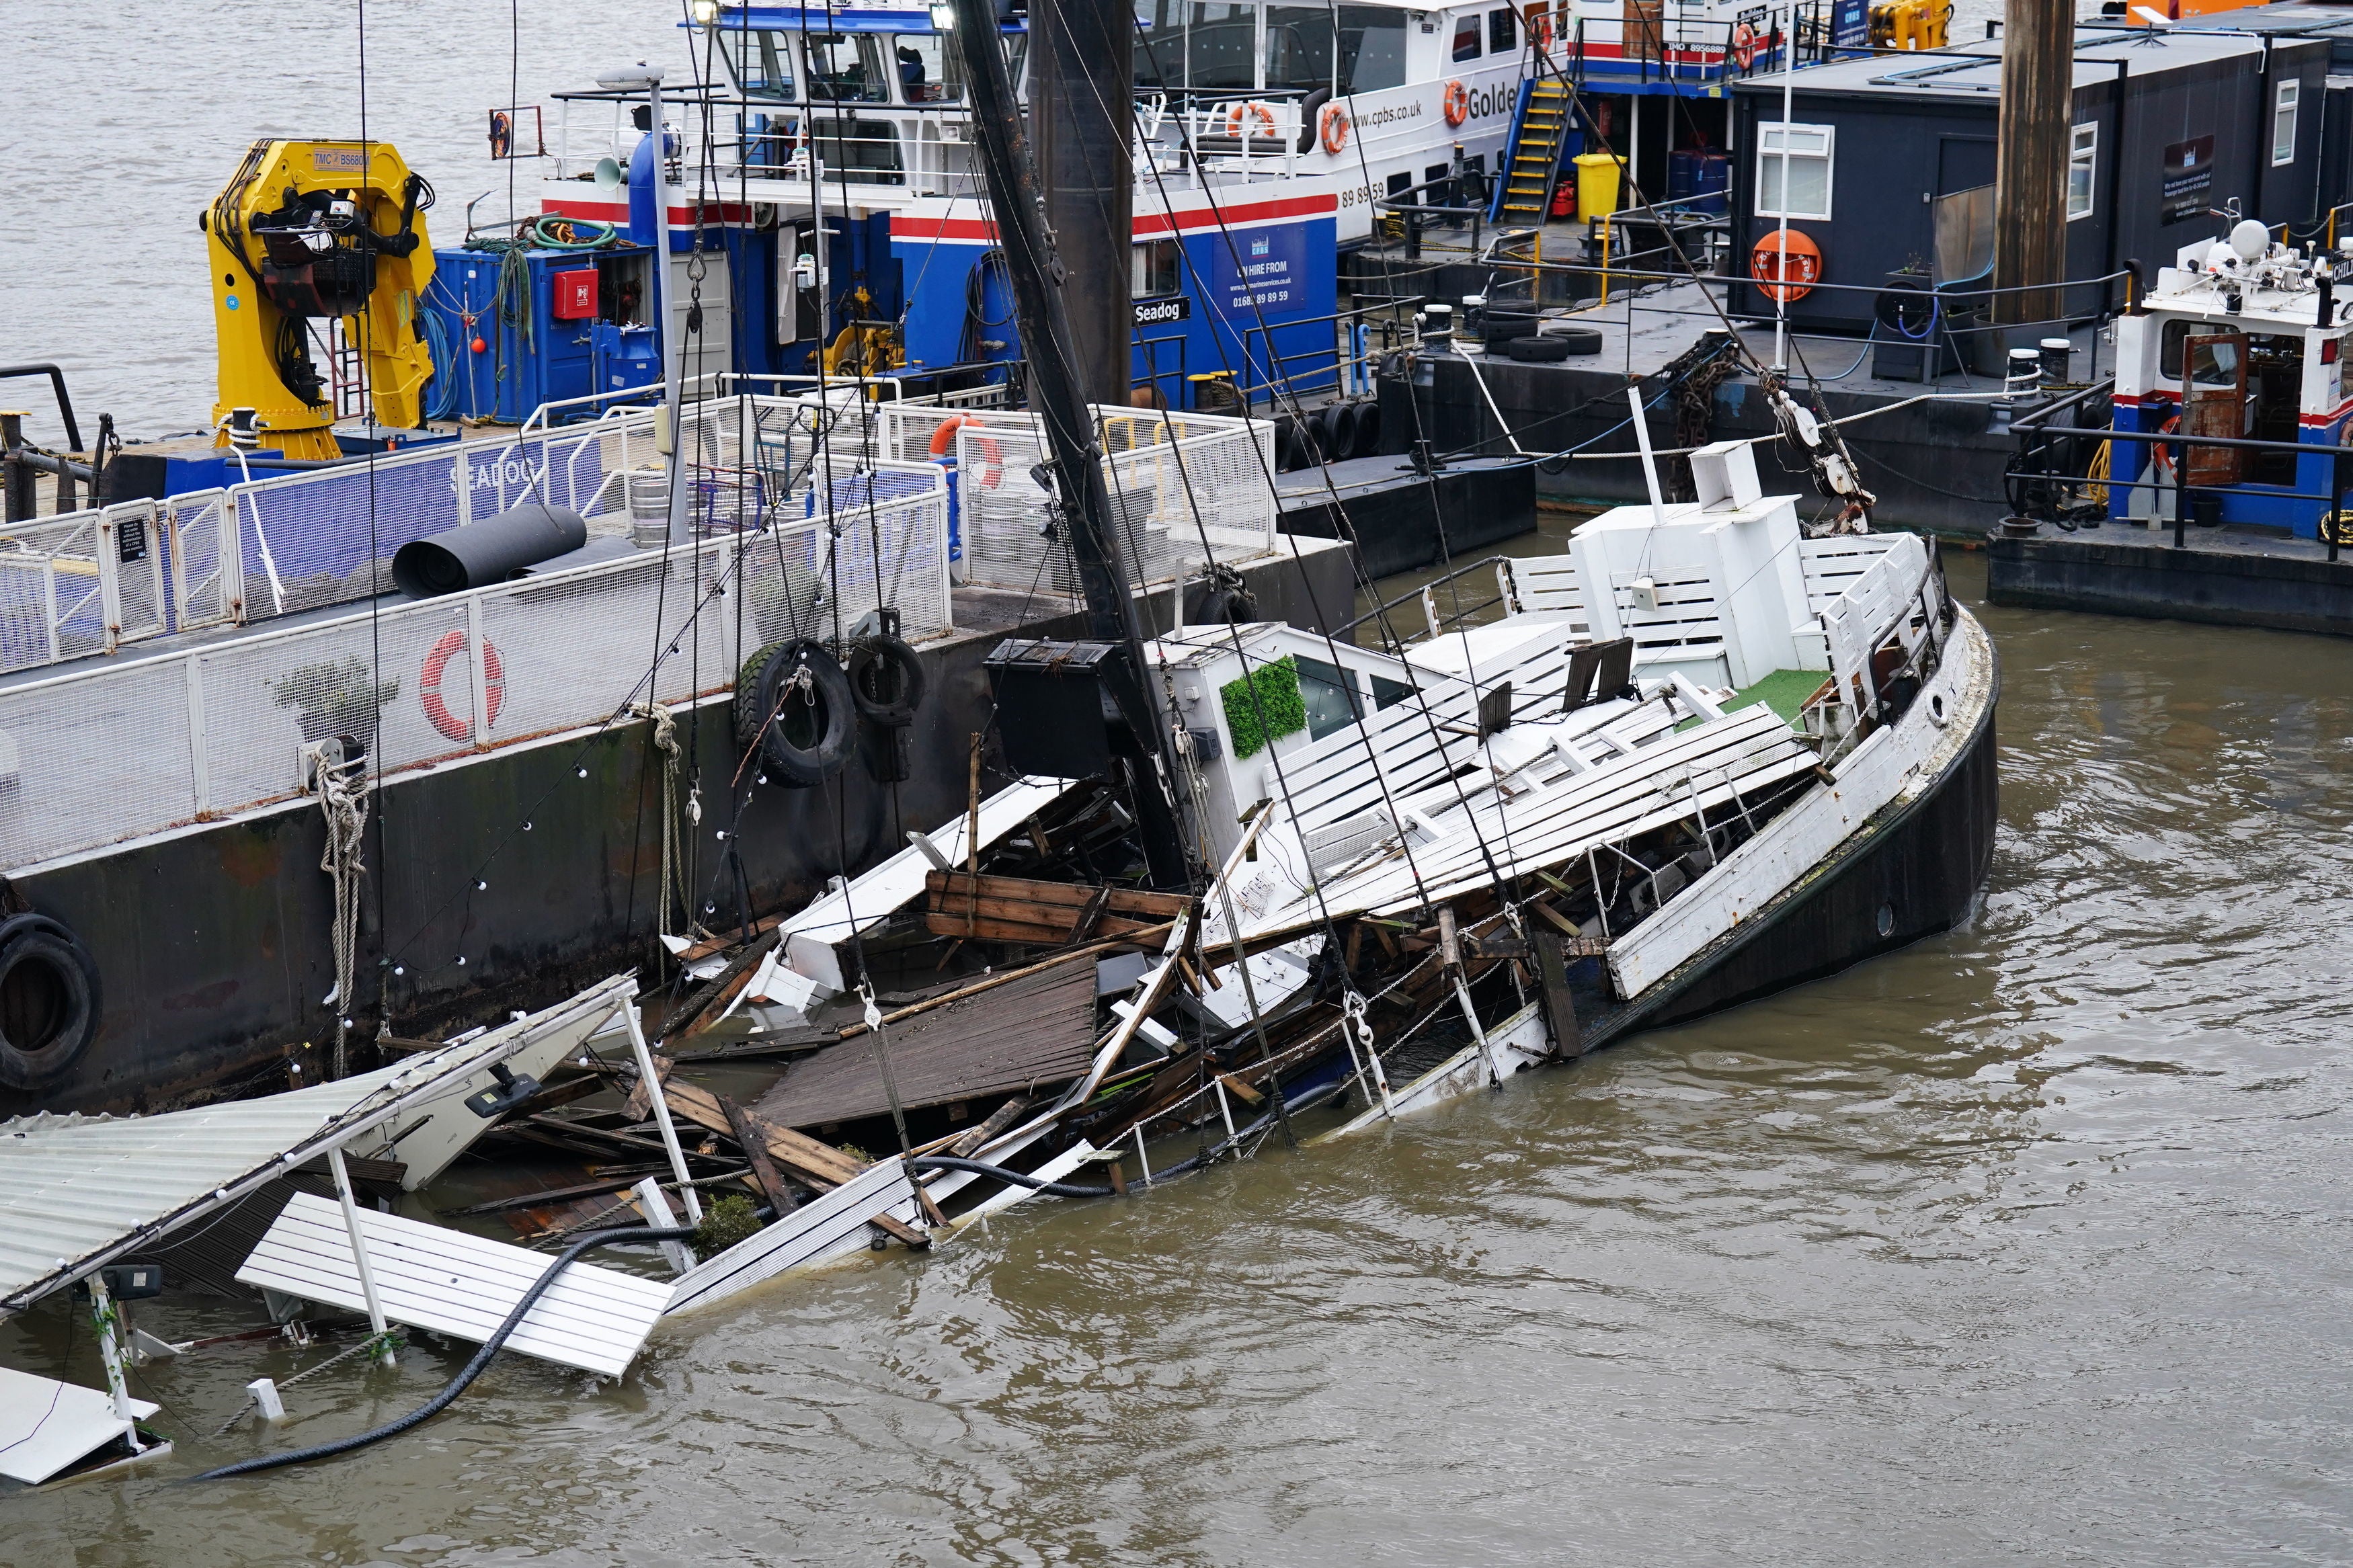 A party boat sank in the River Thames